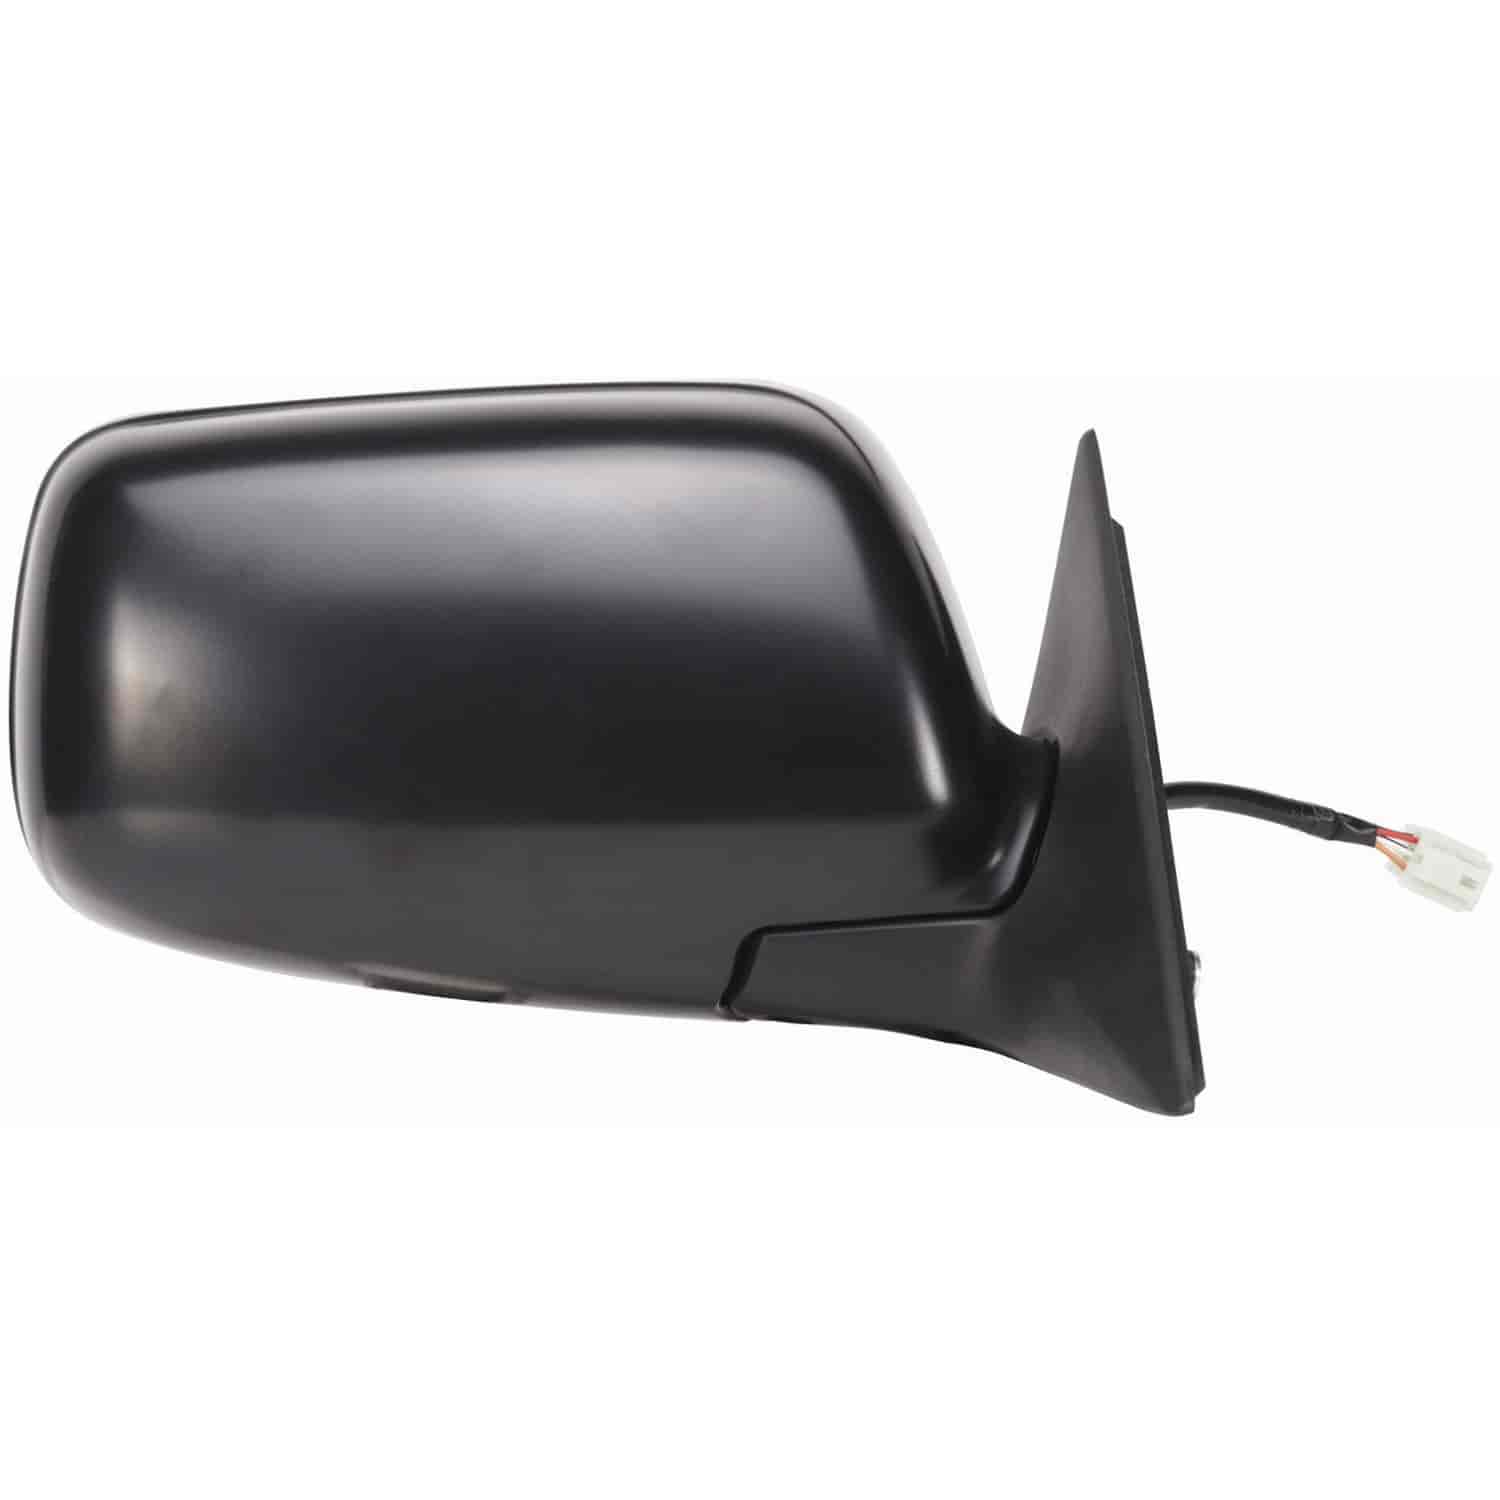 OEM Style Replacement mirror for 00-04 SUBARU Outback passenger side mirror tested to fit and functi